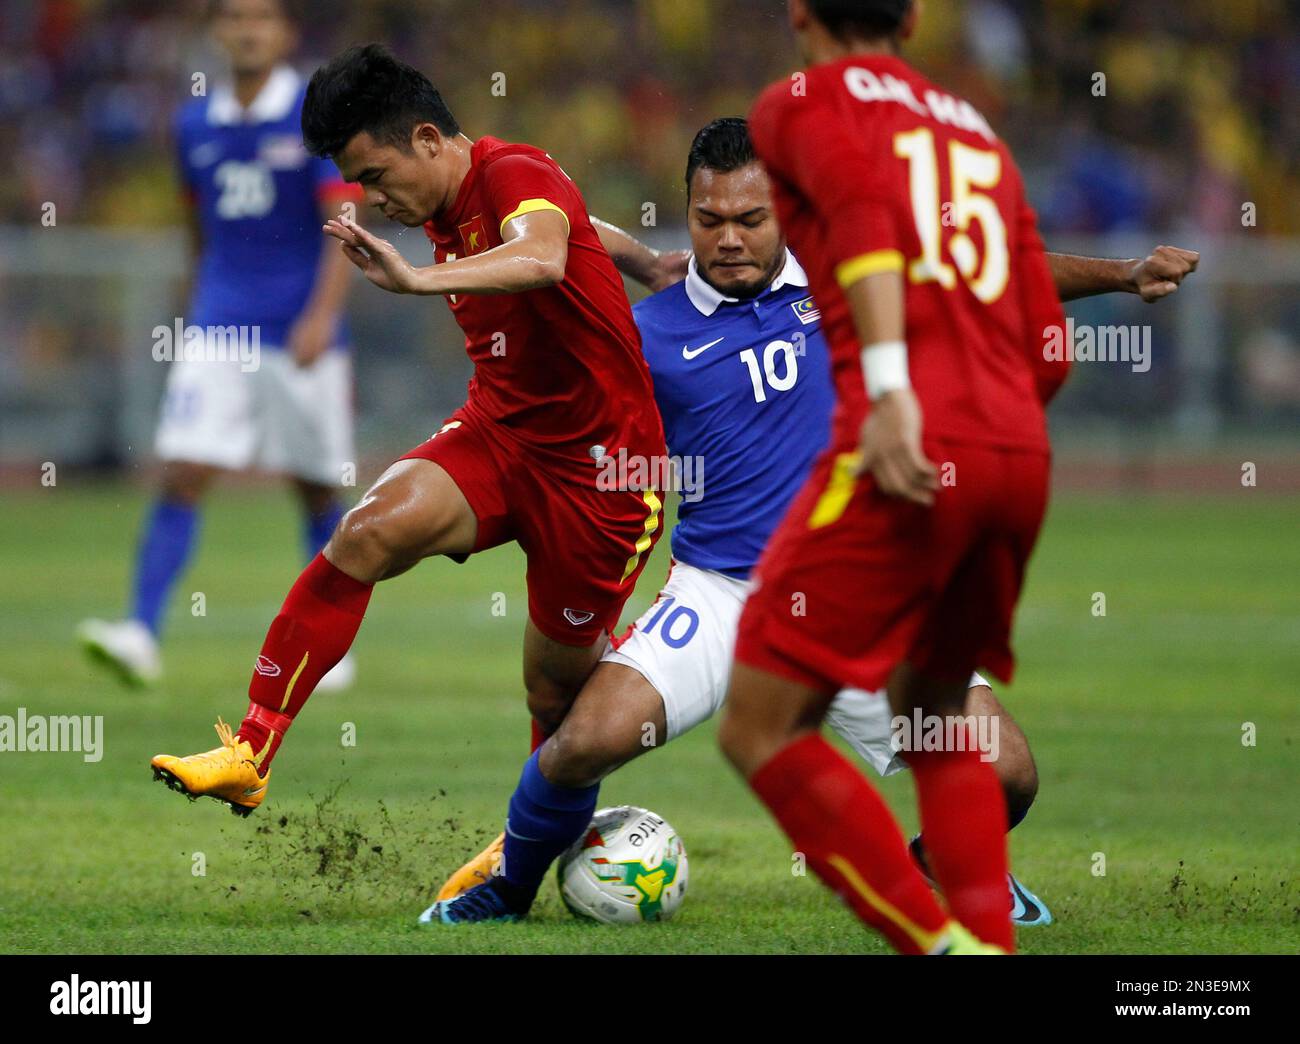 Vietnam's Ngo Hoang Thinh, left, and Malaysia's Mohd Safee Mohd Sali, center, battle for the ball during their semi final first leg soccer match of the AFF Suzuki Cup 2014 at a stadium in Shah Alam, outside Kuala Lumpur, Malaysia, Sunday, Dec. 7, 2014. (AP Photo/Lai Seng Sin) Stock Photo